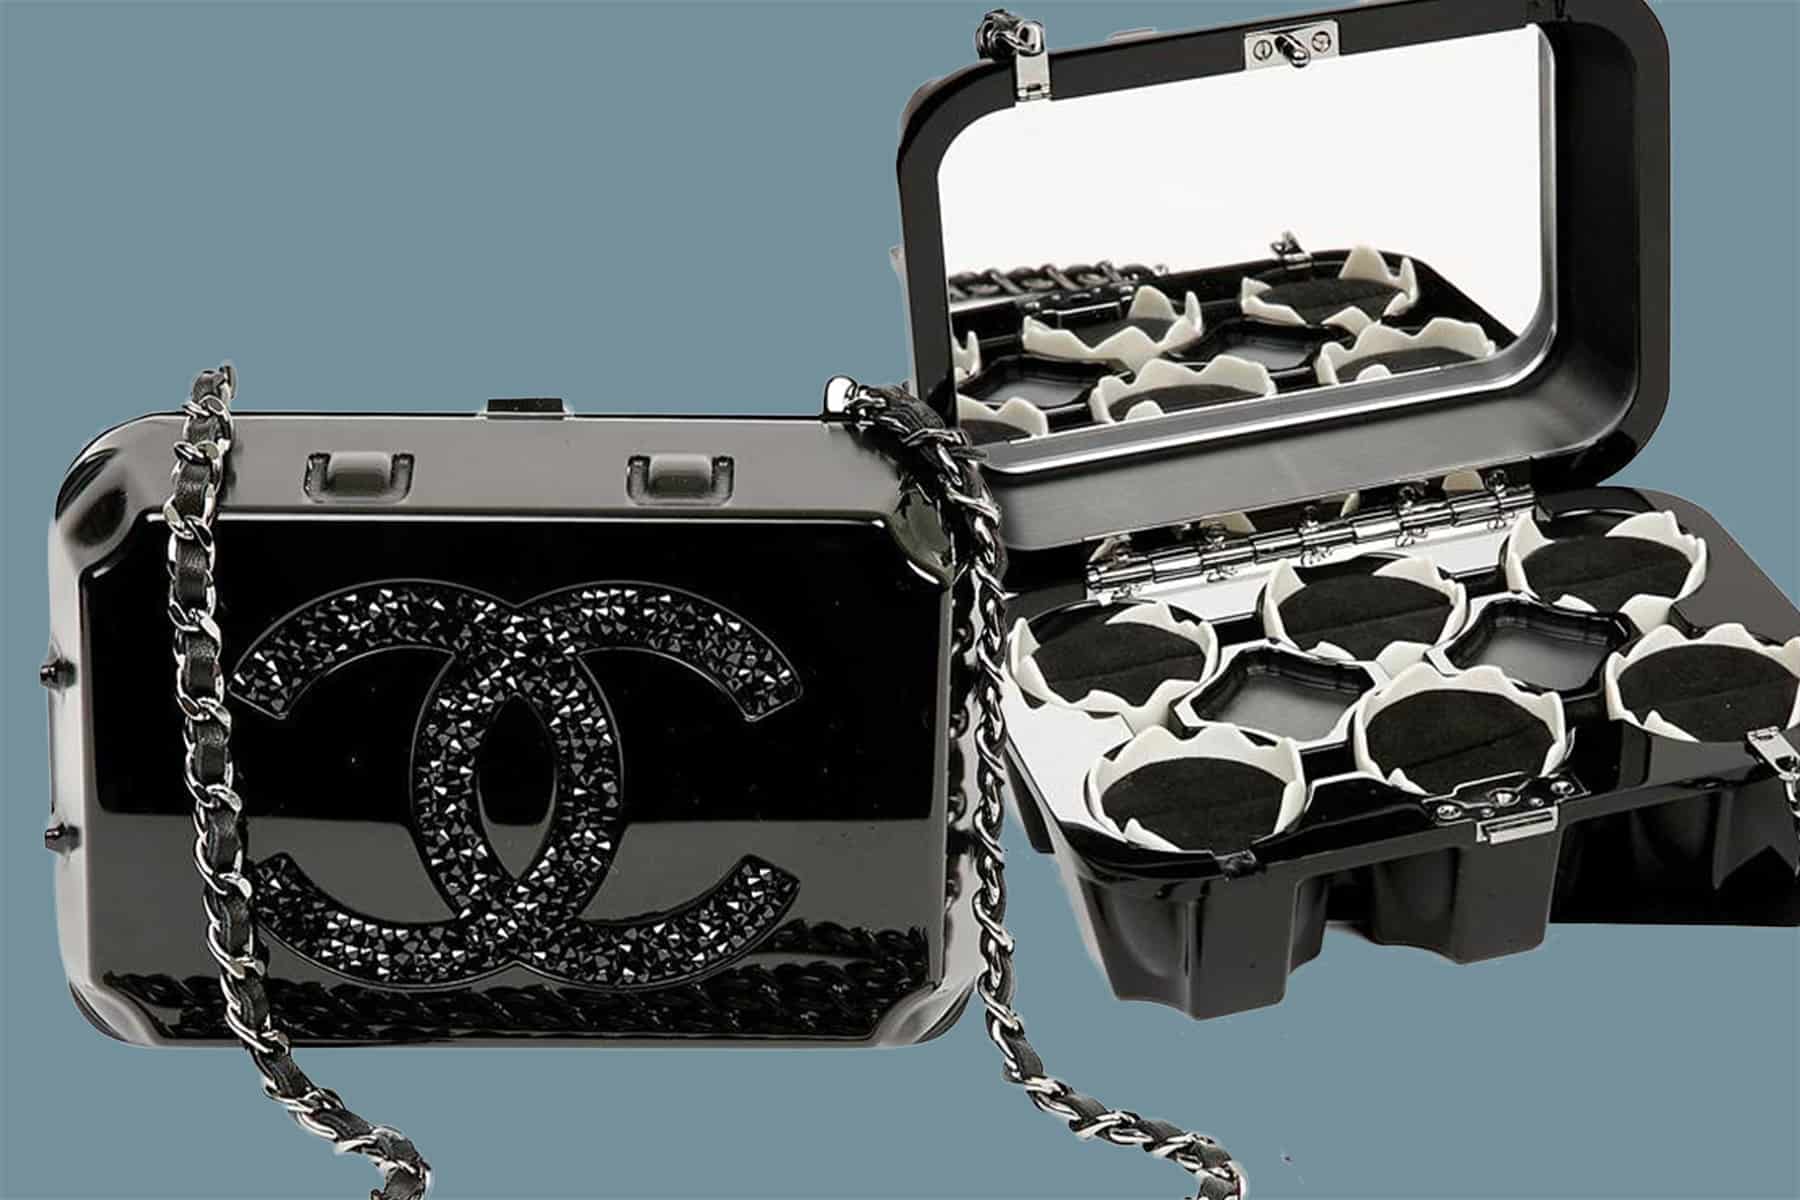 With a Wink, Karl Lagerfeld Sent This Egg-Carton-Shaped Chanel Bag Down the Runway